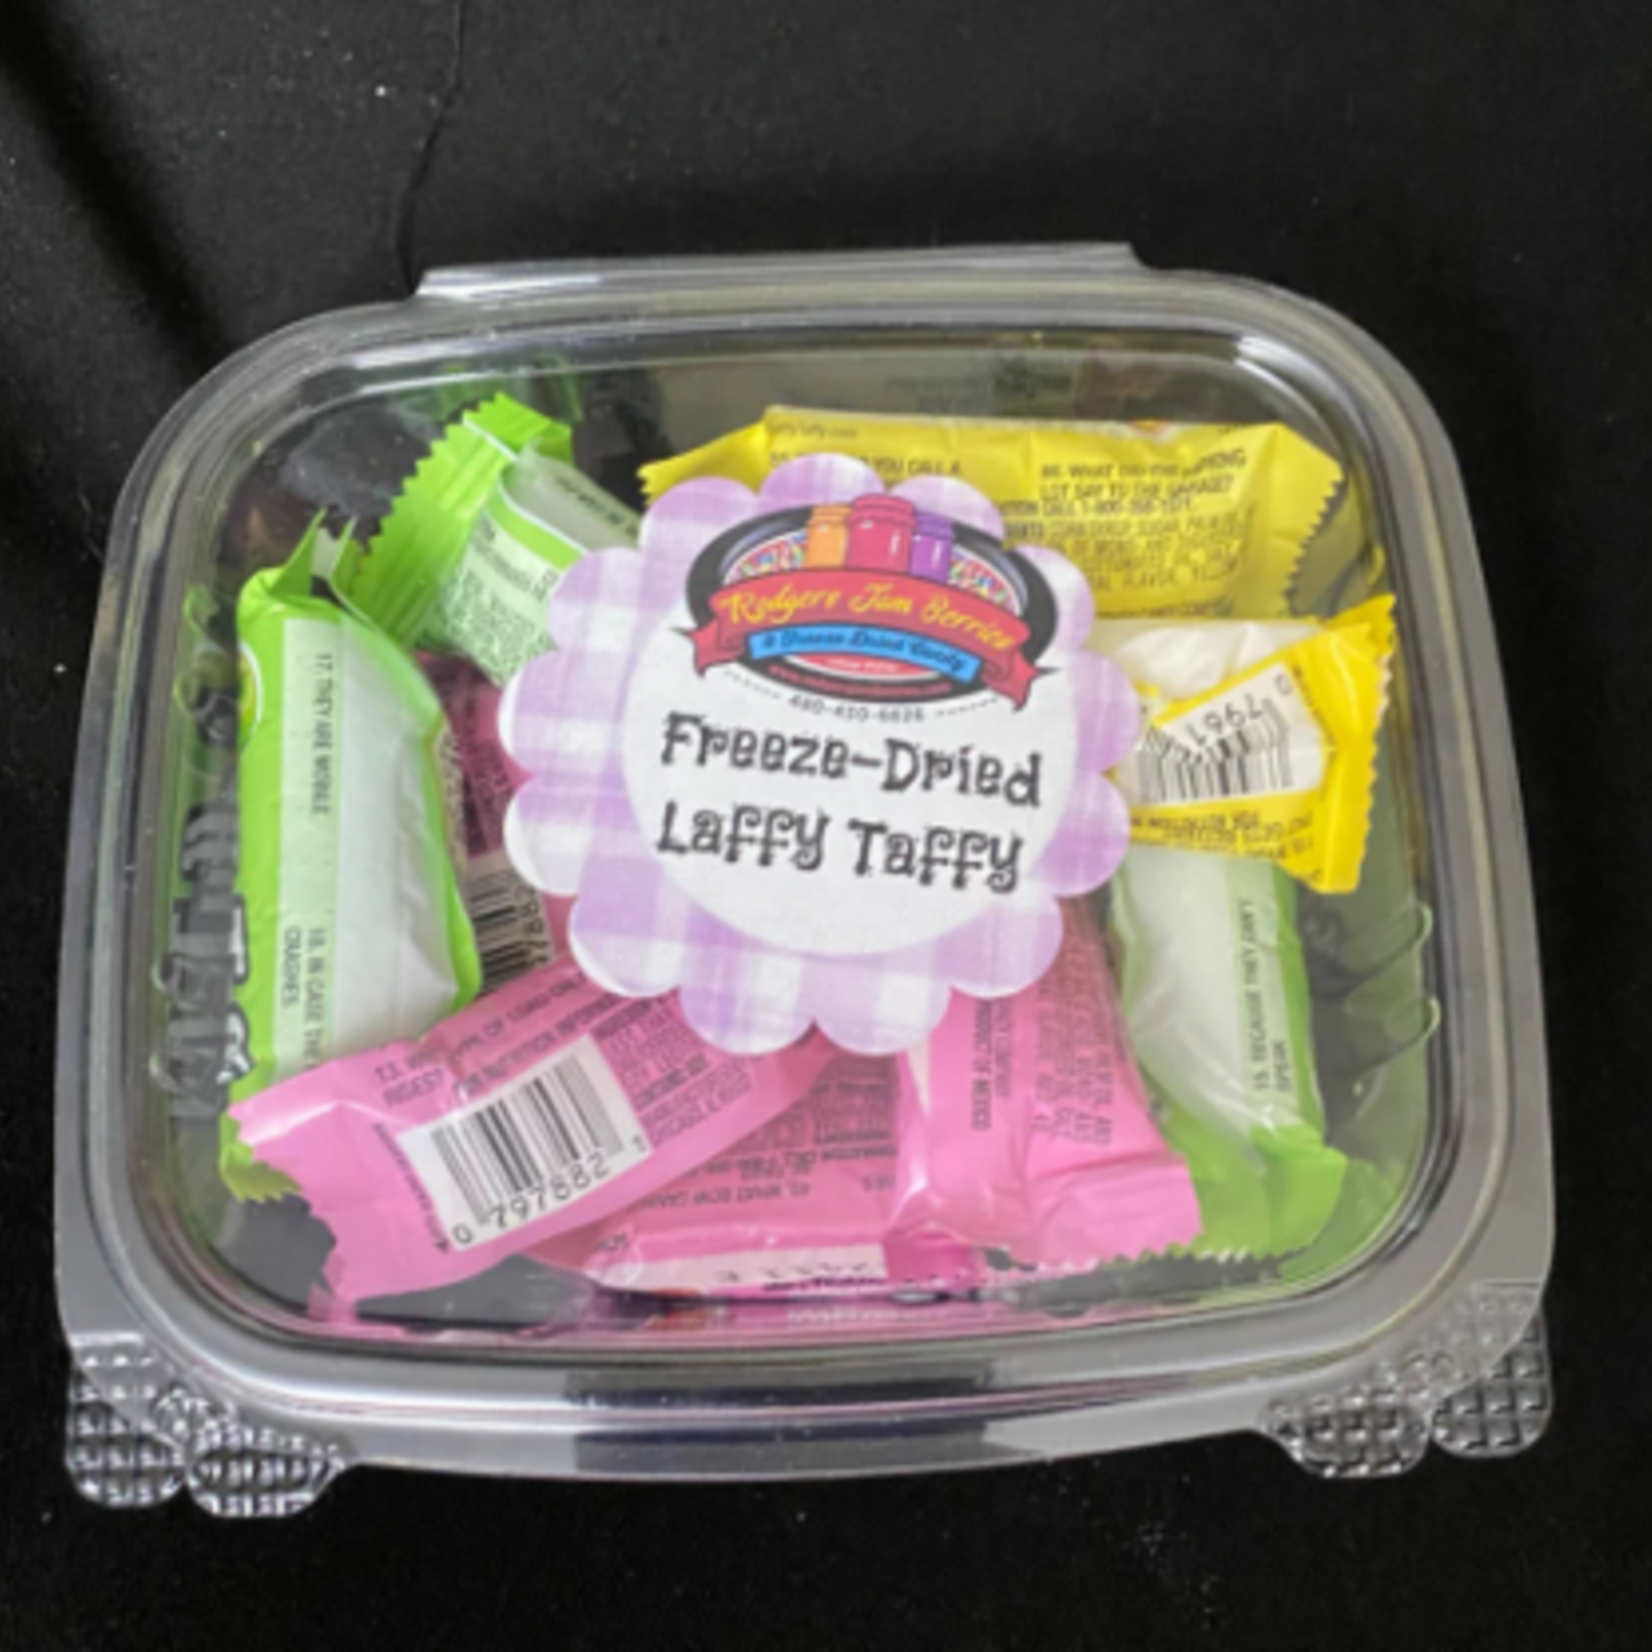 Rodgers Jam Berries Freeze Dried Laffy Taffy - Variety